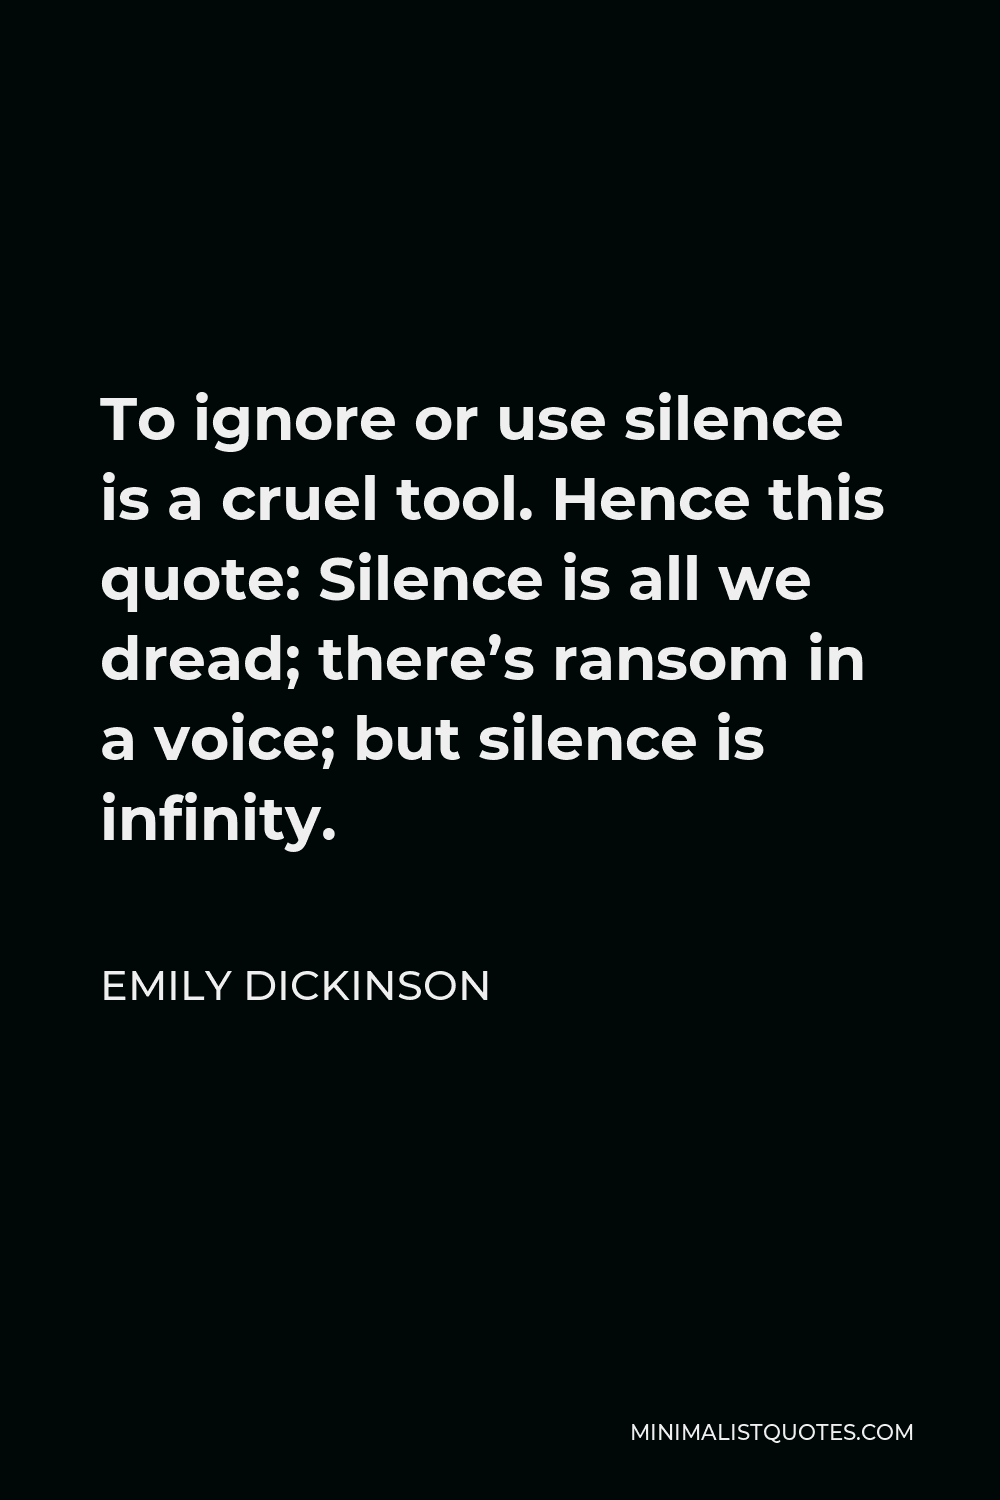 Emily Dickinson Quote: To ignore or use silence is a cruel tool ...